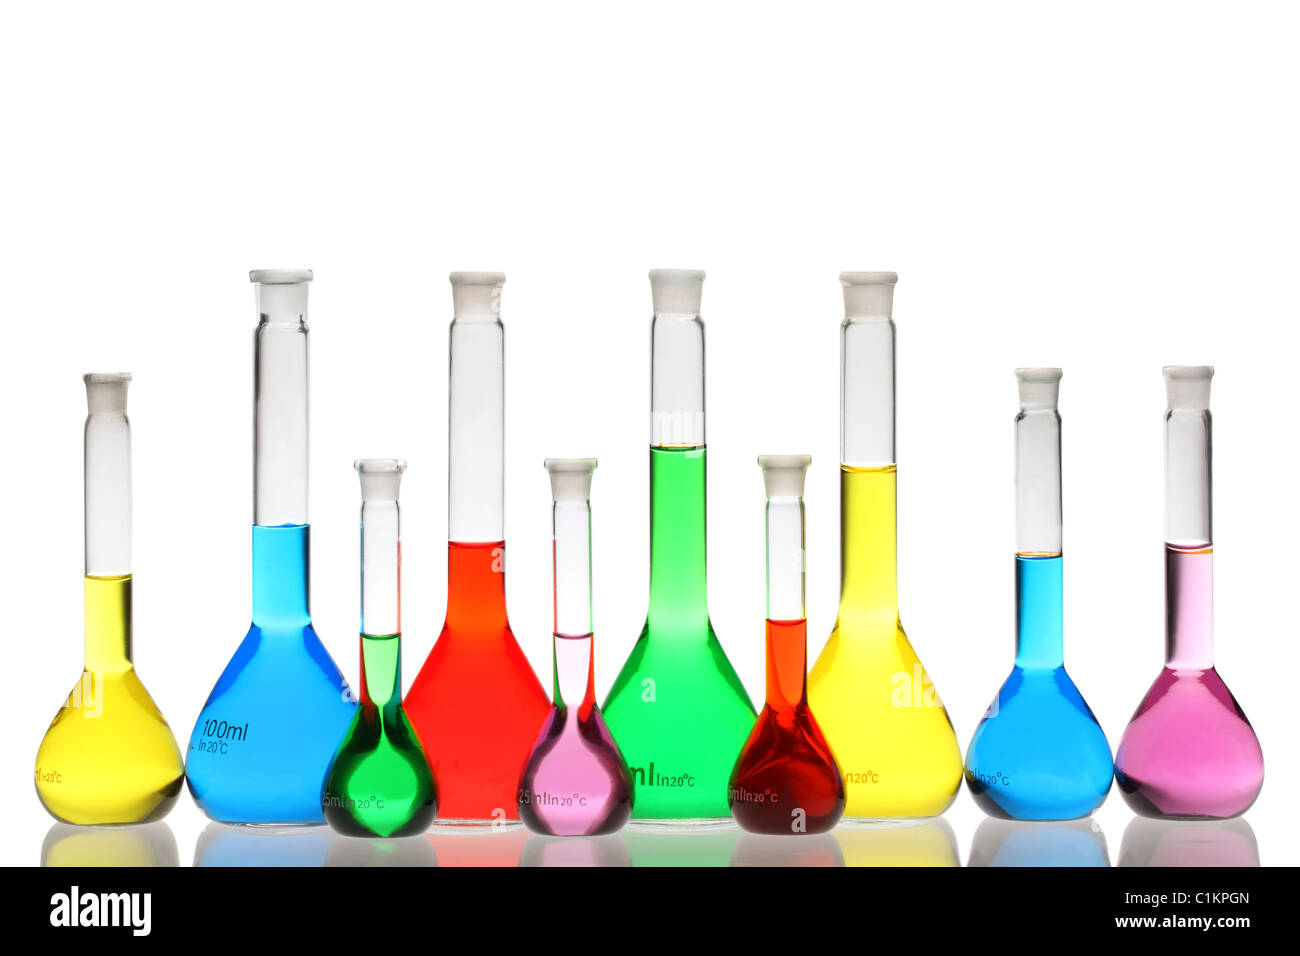 Laboratory glassware with liquids of different colors isolated on white background Stock Photo